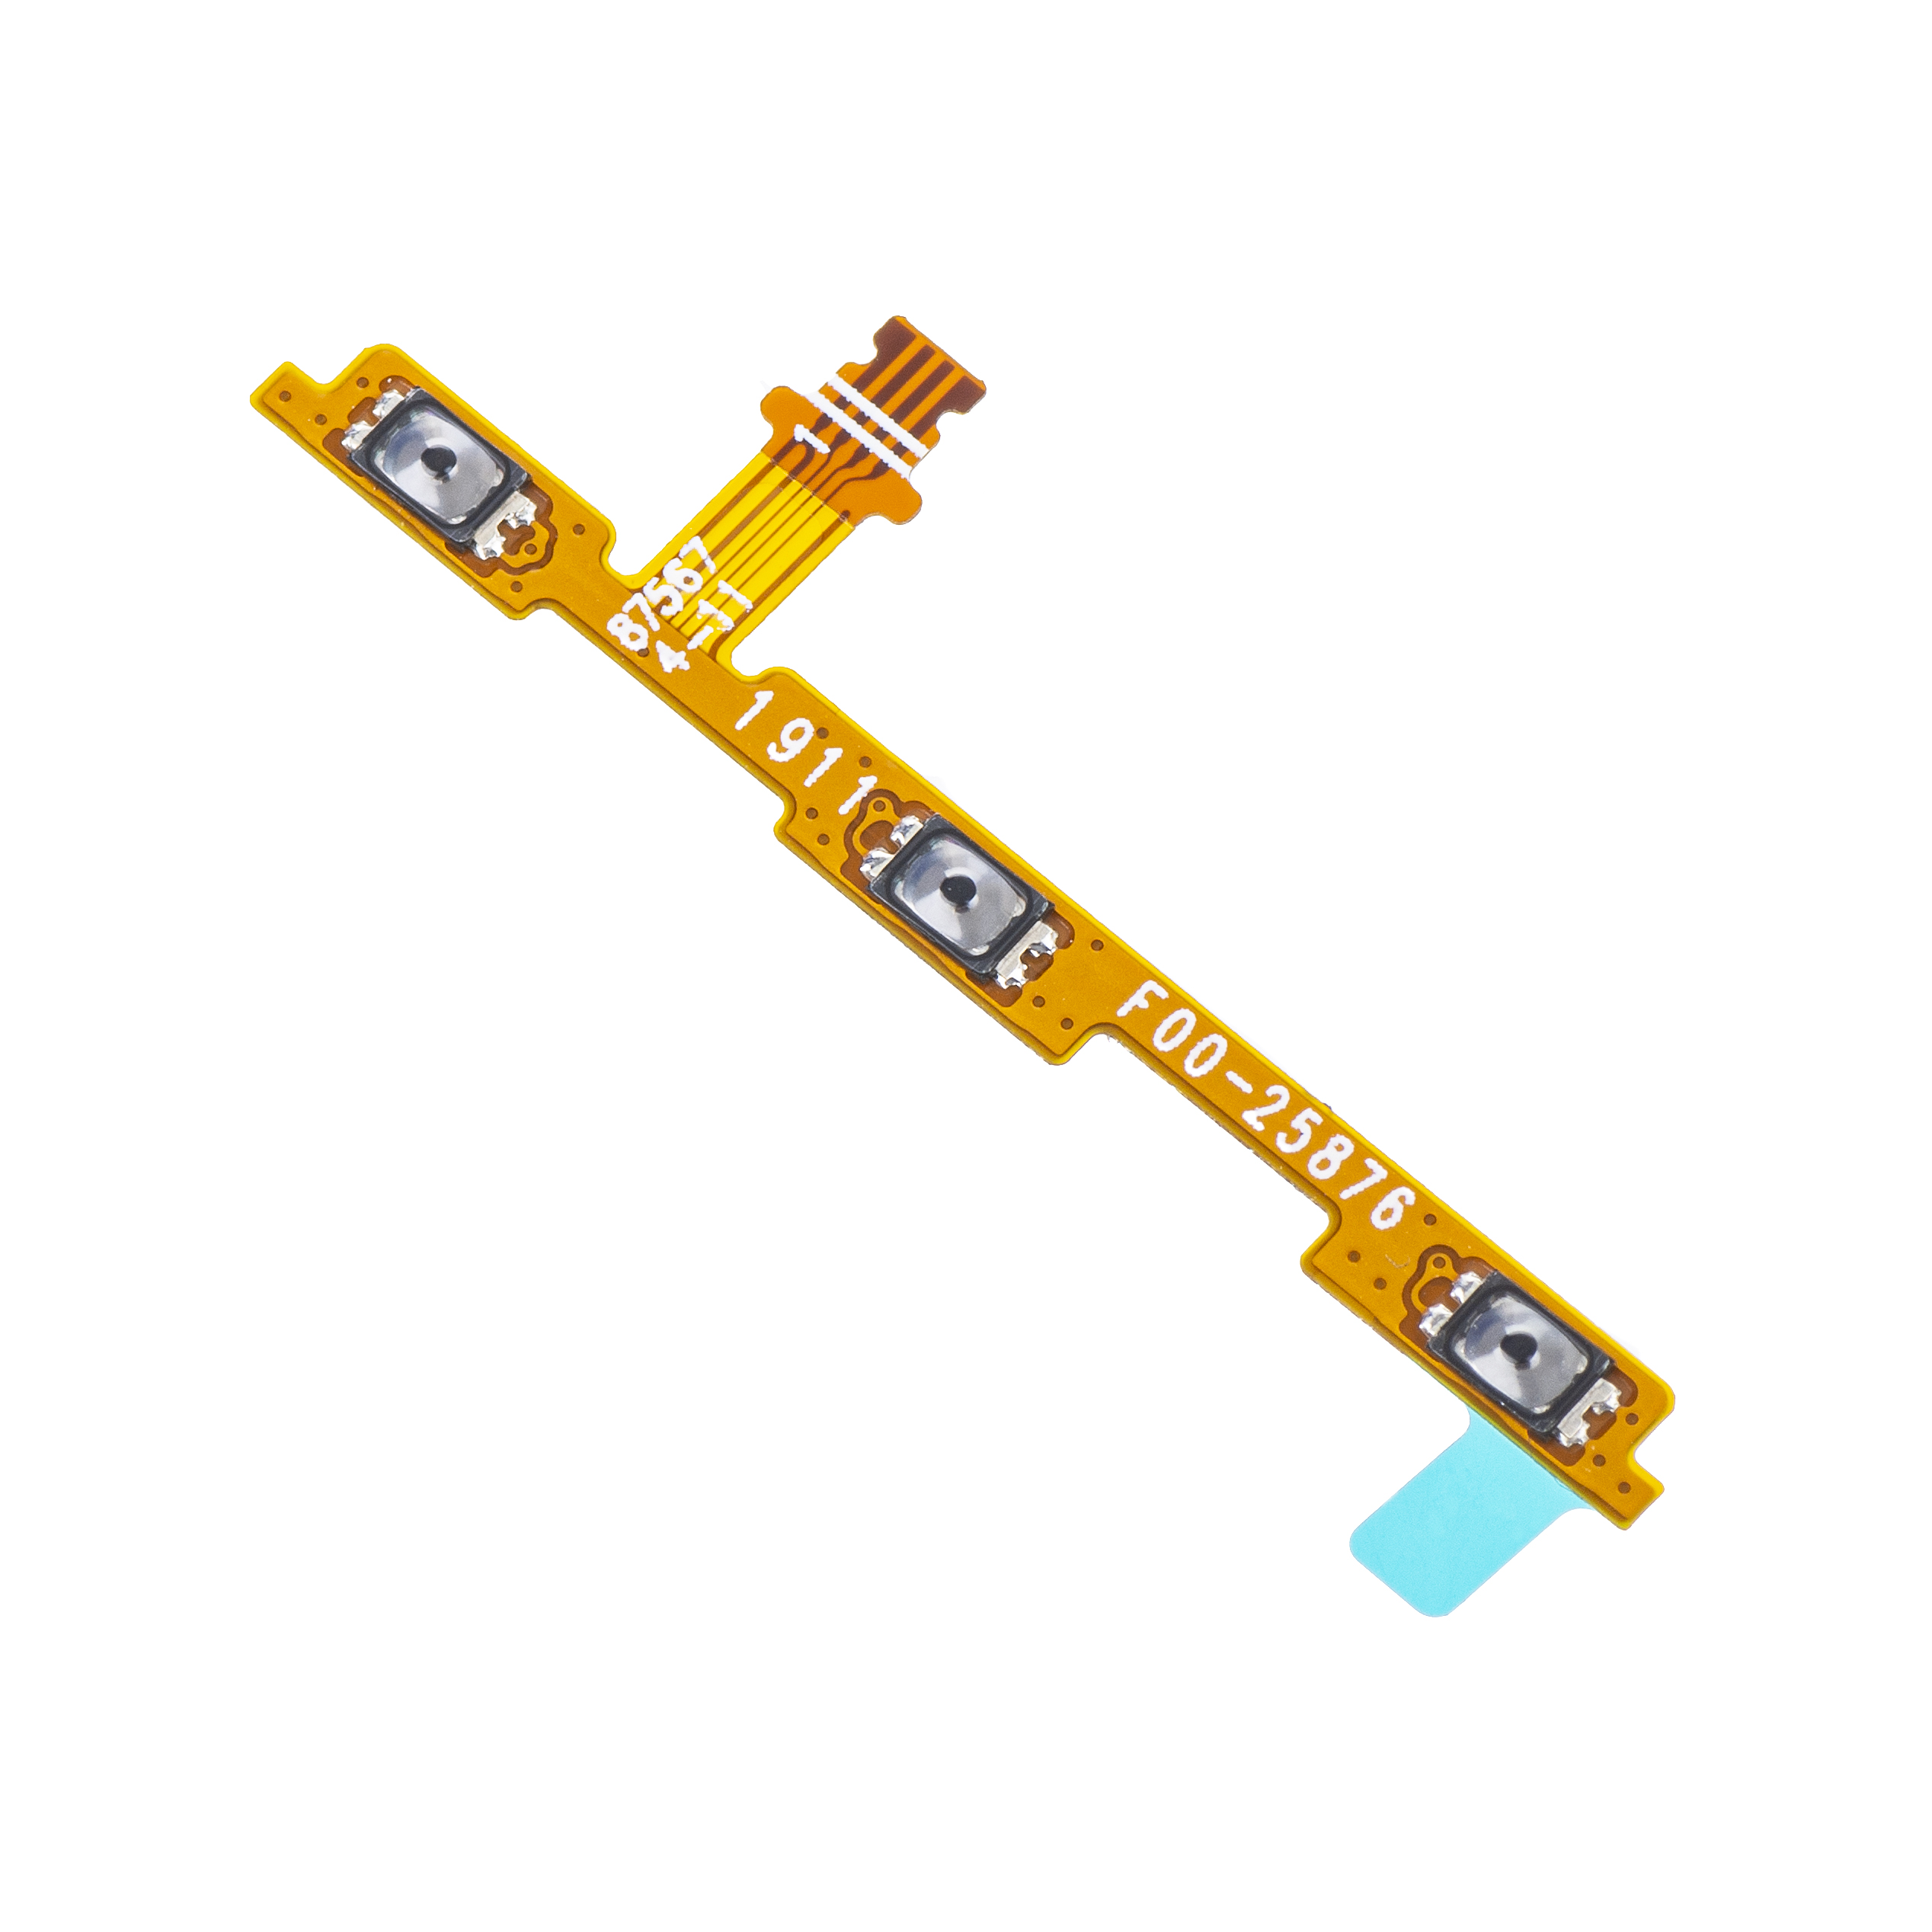 volume-button-flex-cable-for-huawei-y6--282018-29-97070trm